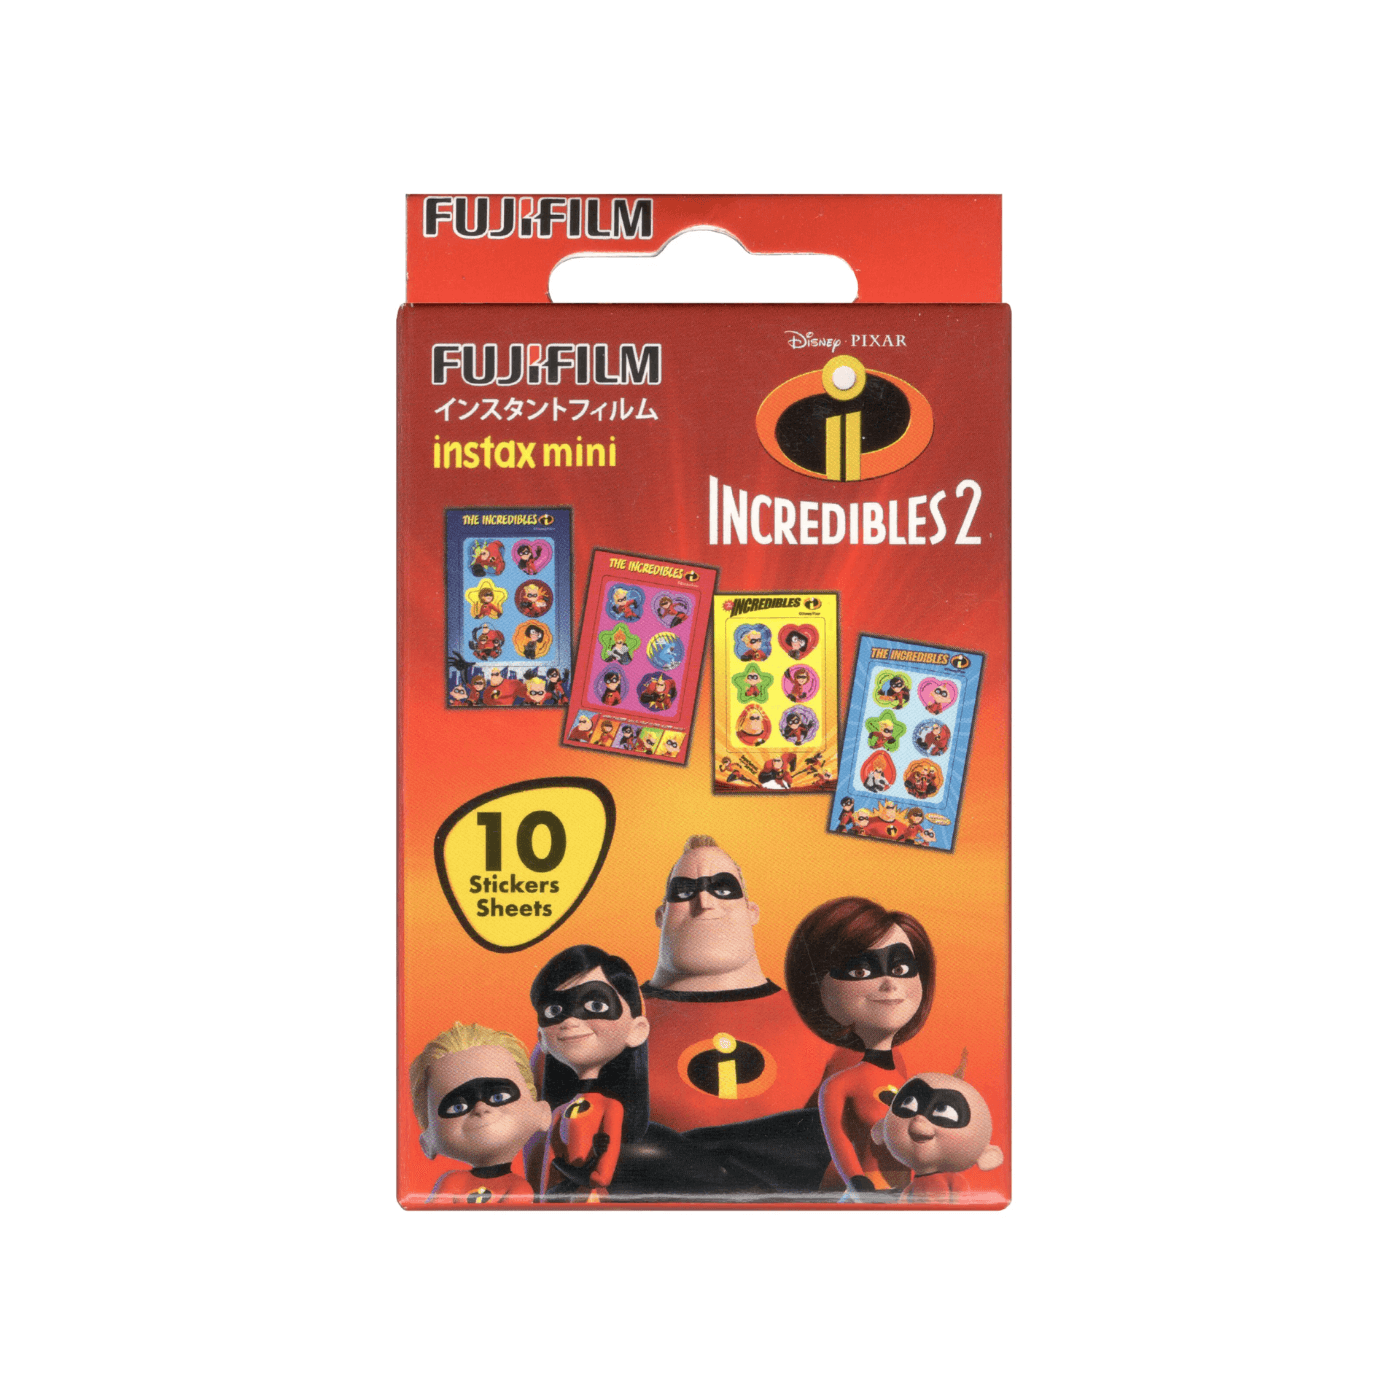 Fujifilm instax mini Instant Film with Stickers (Incredibles 2)